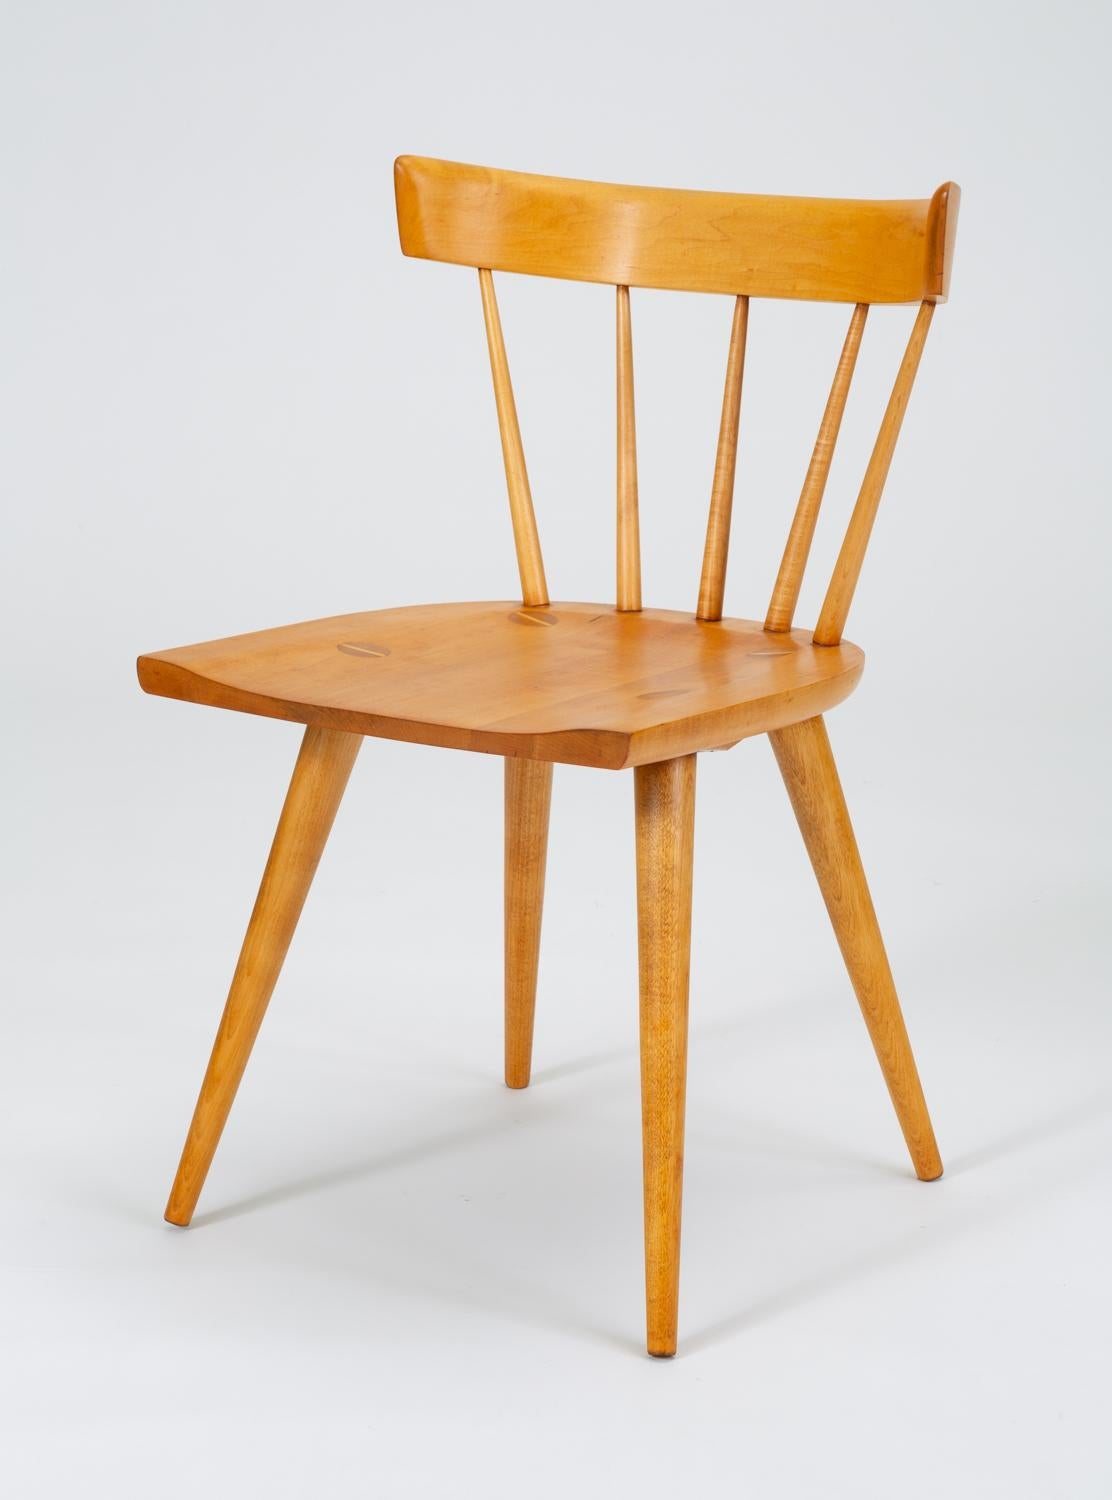 A set of four dining chairs in solid maple from Paul McCobb's iconic Planner Group, manufactured from 1950-1964 by Winchendon Furniture. The chair, model #1531, takes its basic inspiration from a Windsor chair, with a low spindle back of tapered